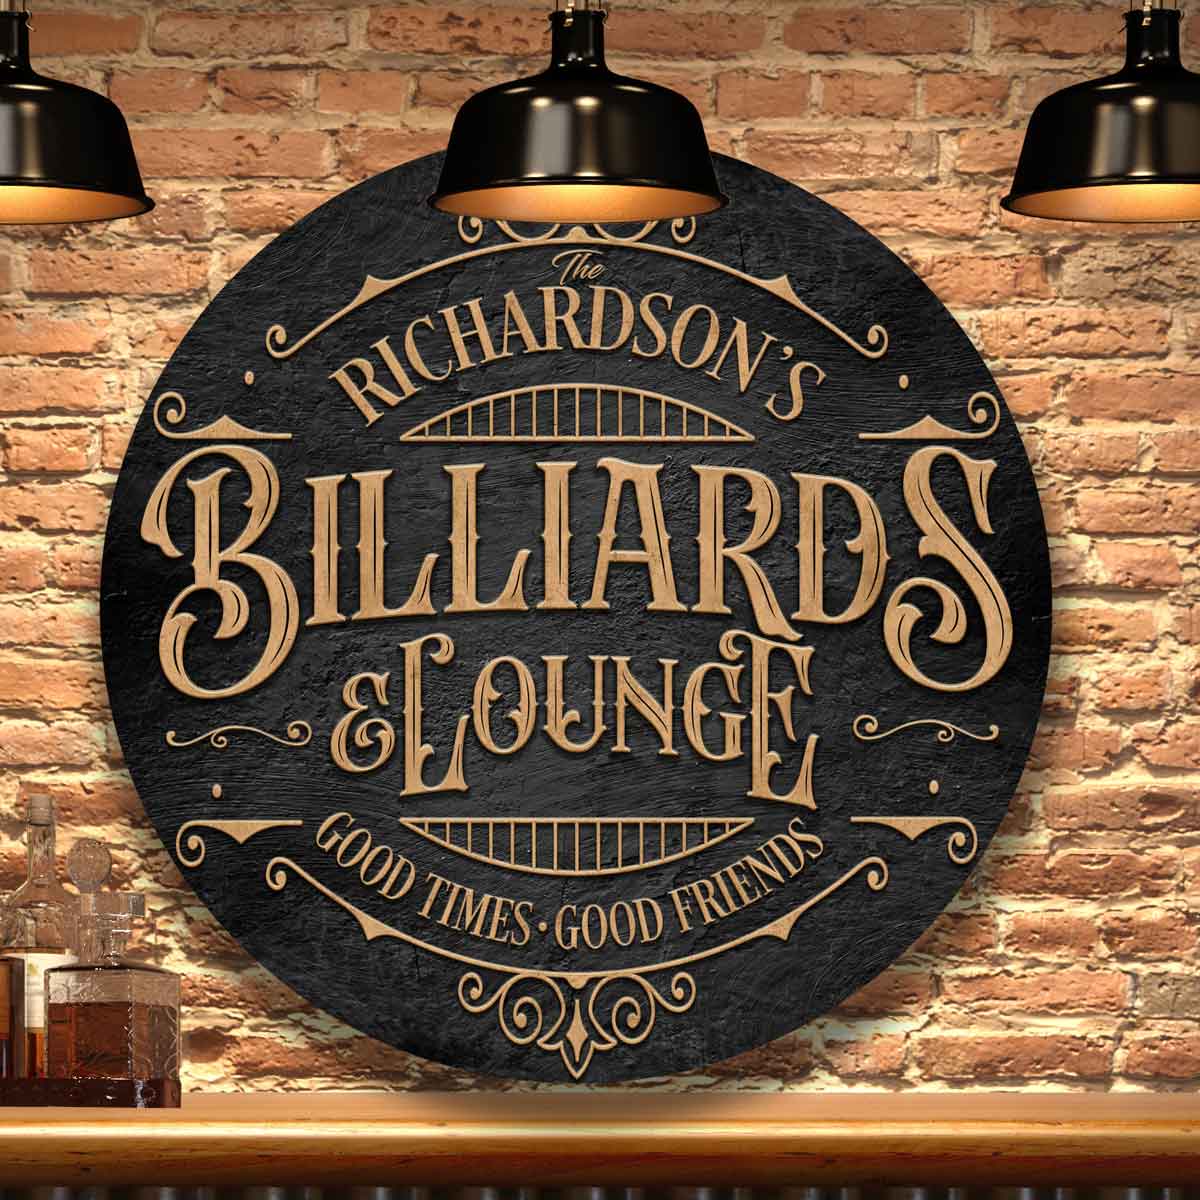 Billiards Sign/Pool hall sign in black metal circle with the words [family name] Billiards & Lounge, good times good friends